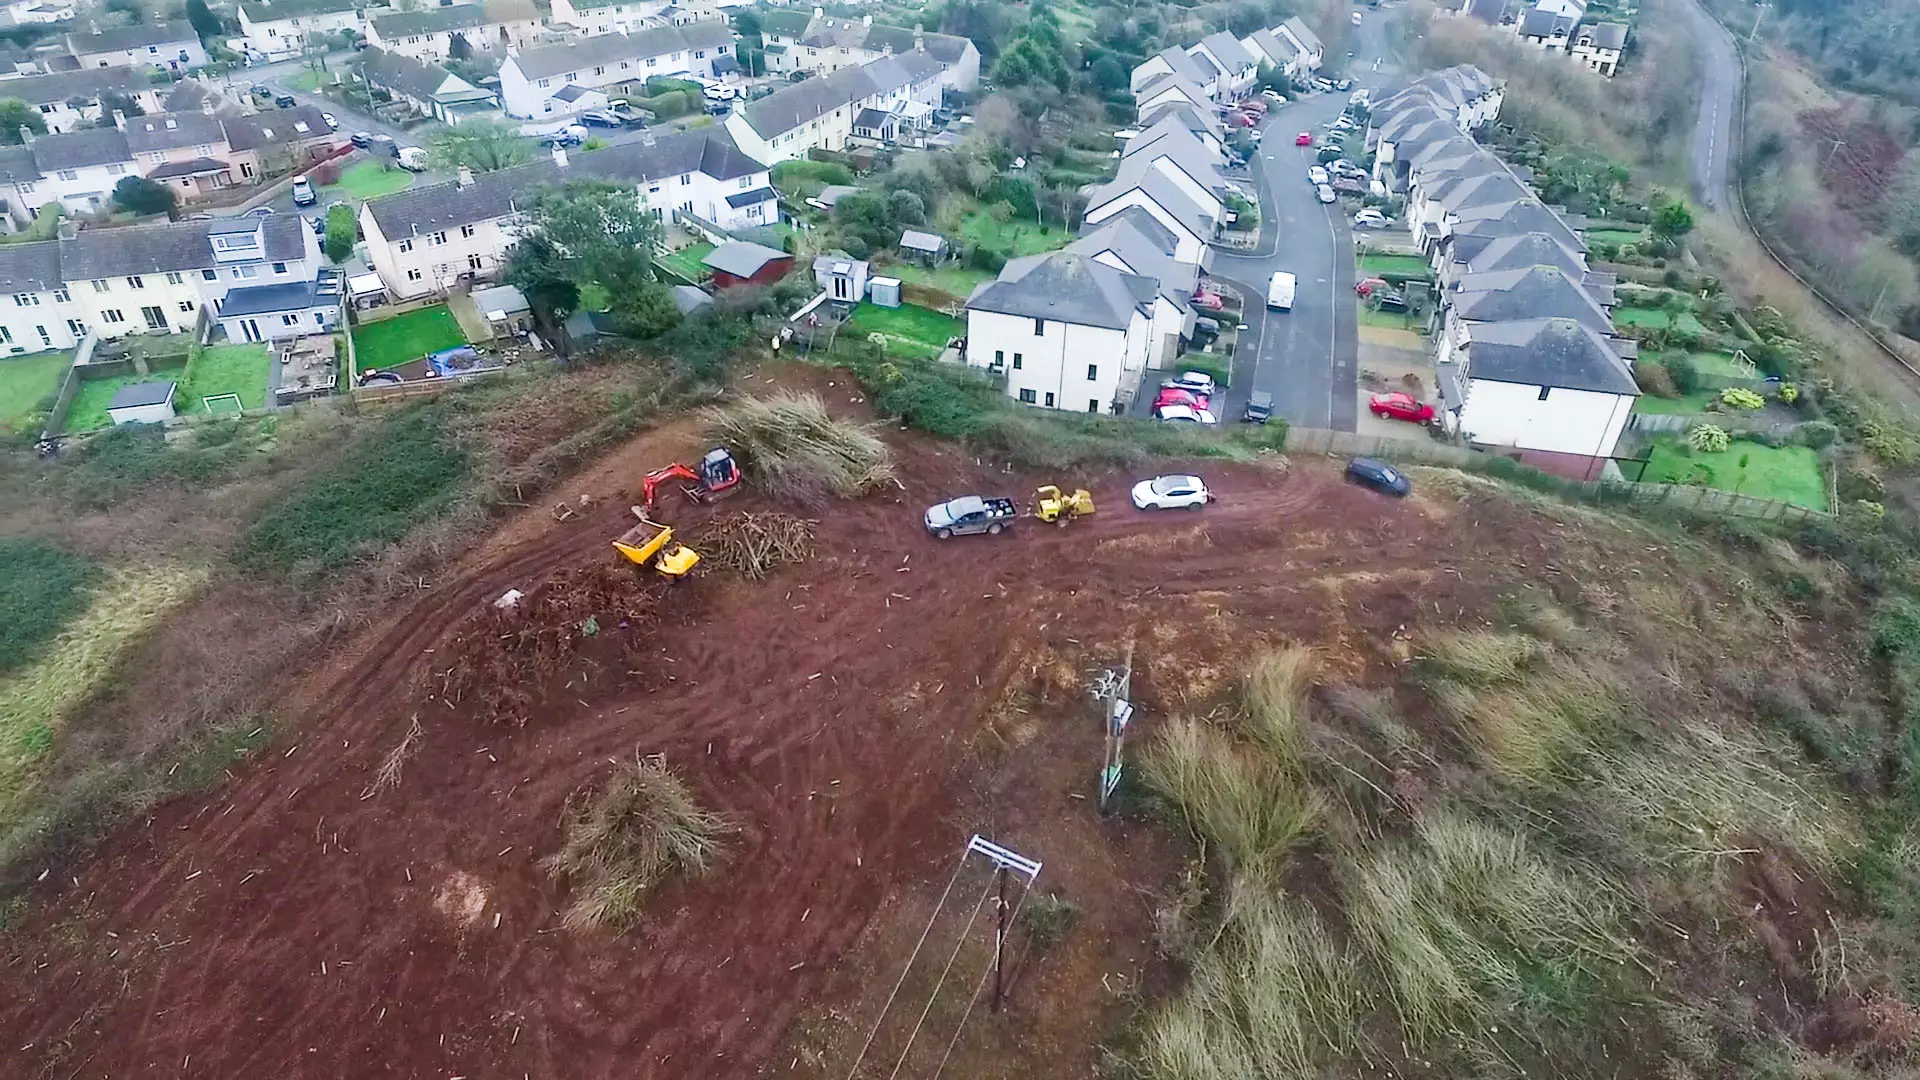 Property Developer ‘Cuts Down Huge Wood Before Applying For Permission To Build There’